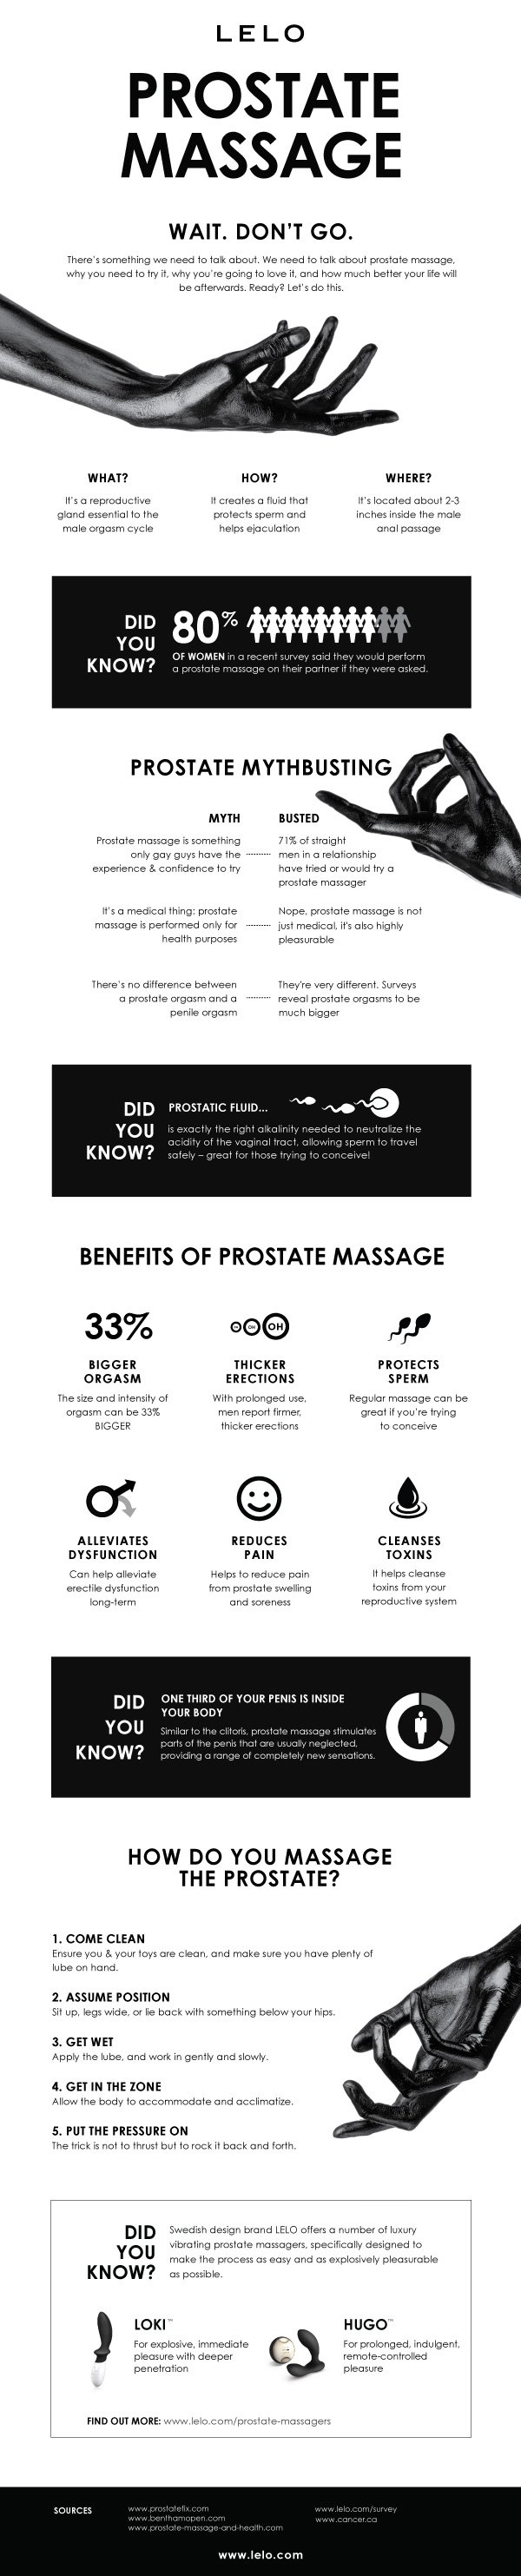 Prostate_Infographic_20150825_7-53pm_2